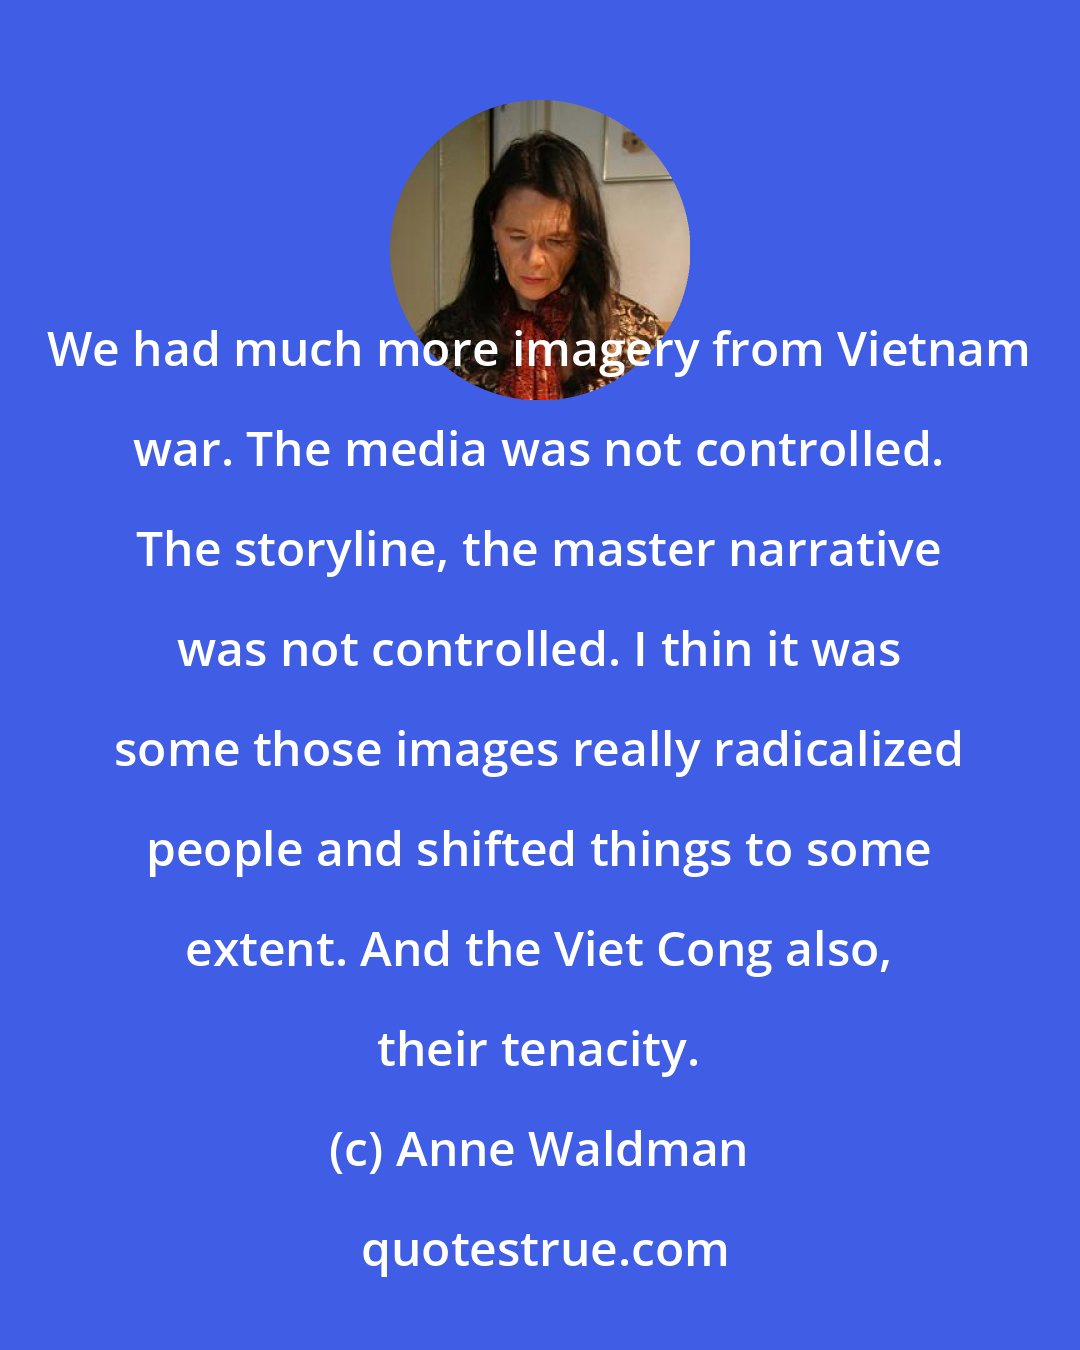 Anne Waldman: We had much more imagery from Vietnam war. The media was not controlled. The storyline, the master narrative was not controlled. I thin it was some those images really radicalized people and shifted things to some extent. And the Viet Cong also, their tenacity.